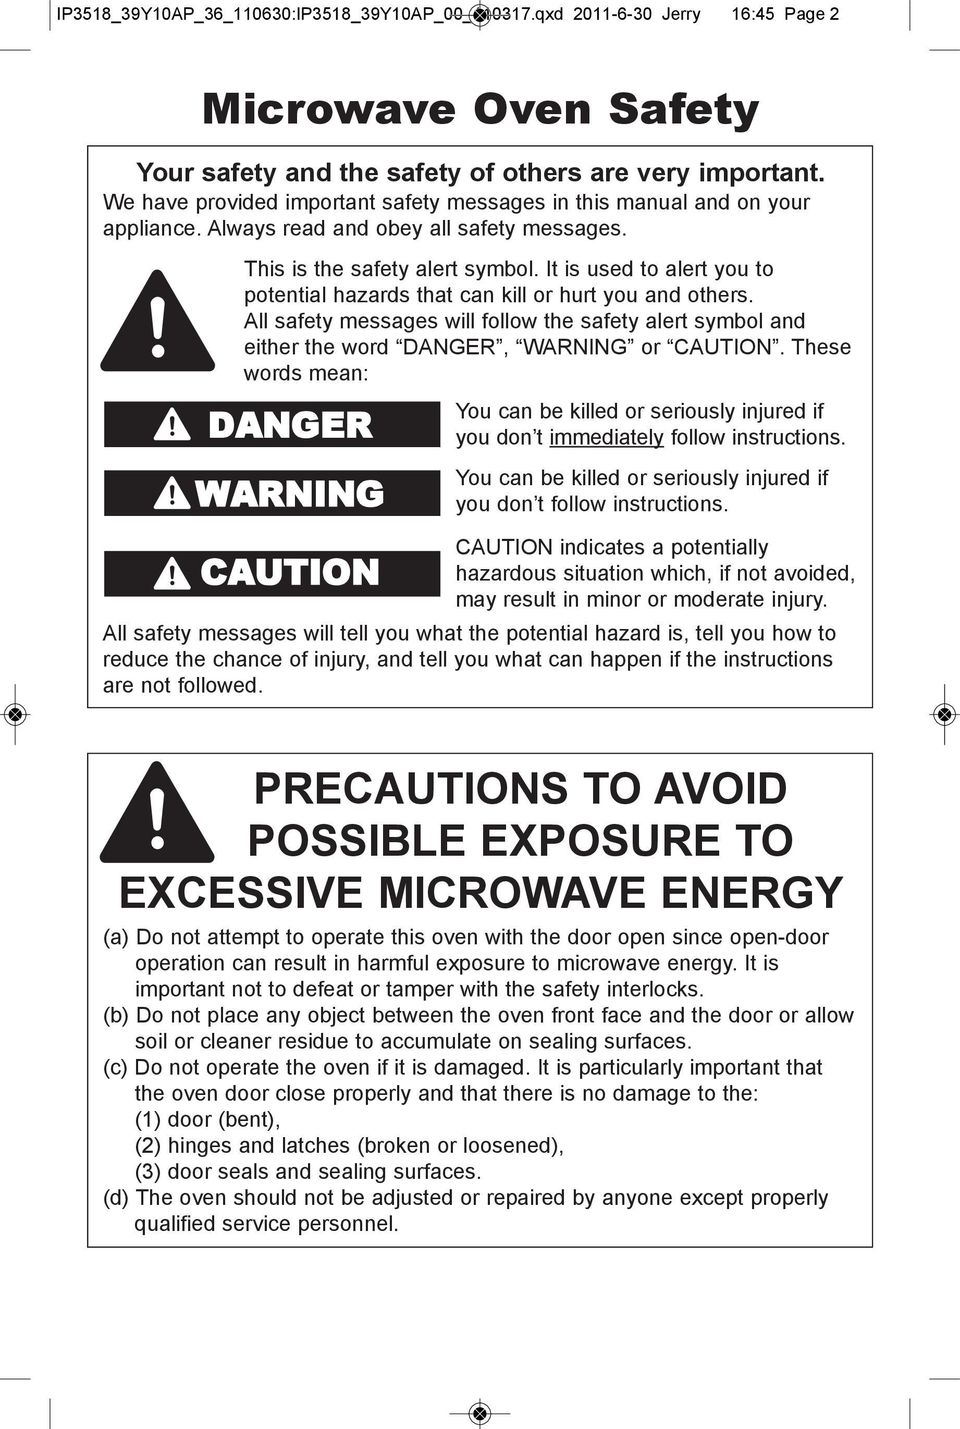 It is used to alert you to potential hazards that can kill or hurt you and others. All safety messages will follow the safety alert symbol and either the word DANGER, WARNING or CAUTION.